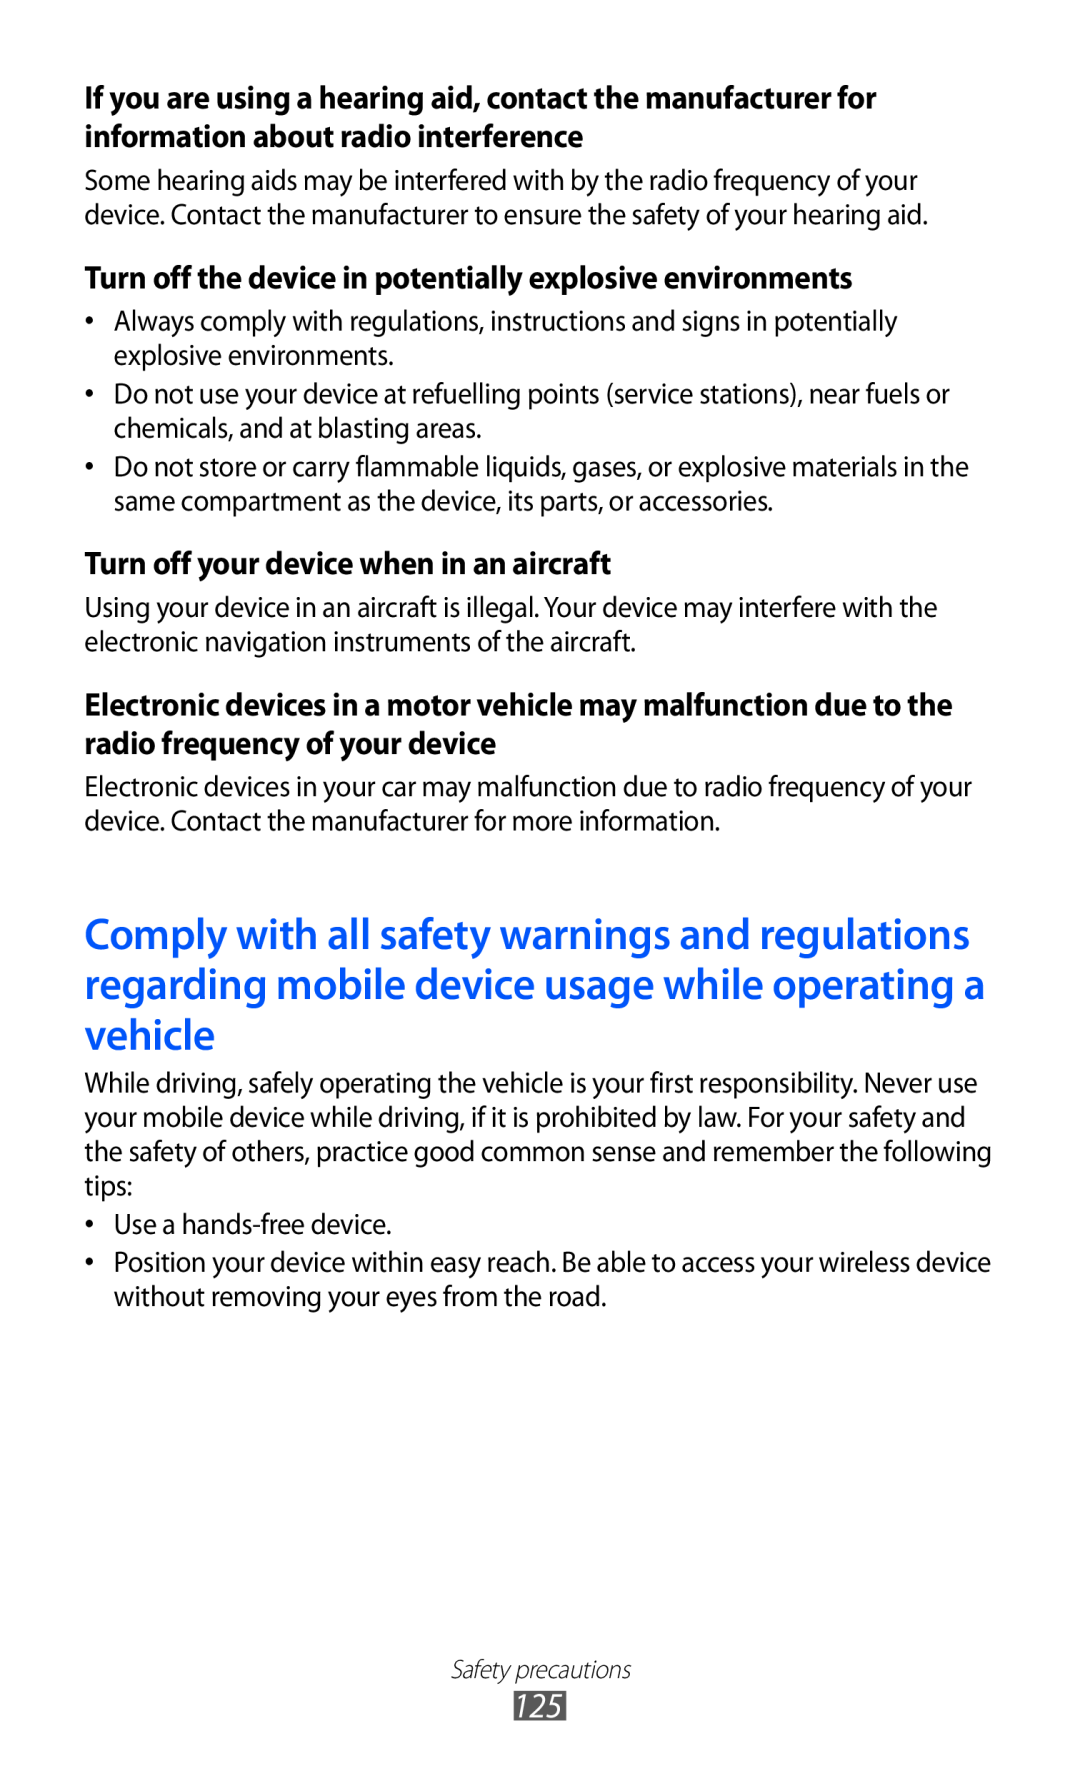 Samsung GT-P7320UWAFTM Turn off the device in potentially explosive environments, Turn off your device when in an aircraft 